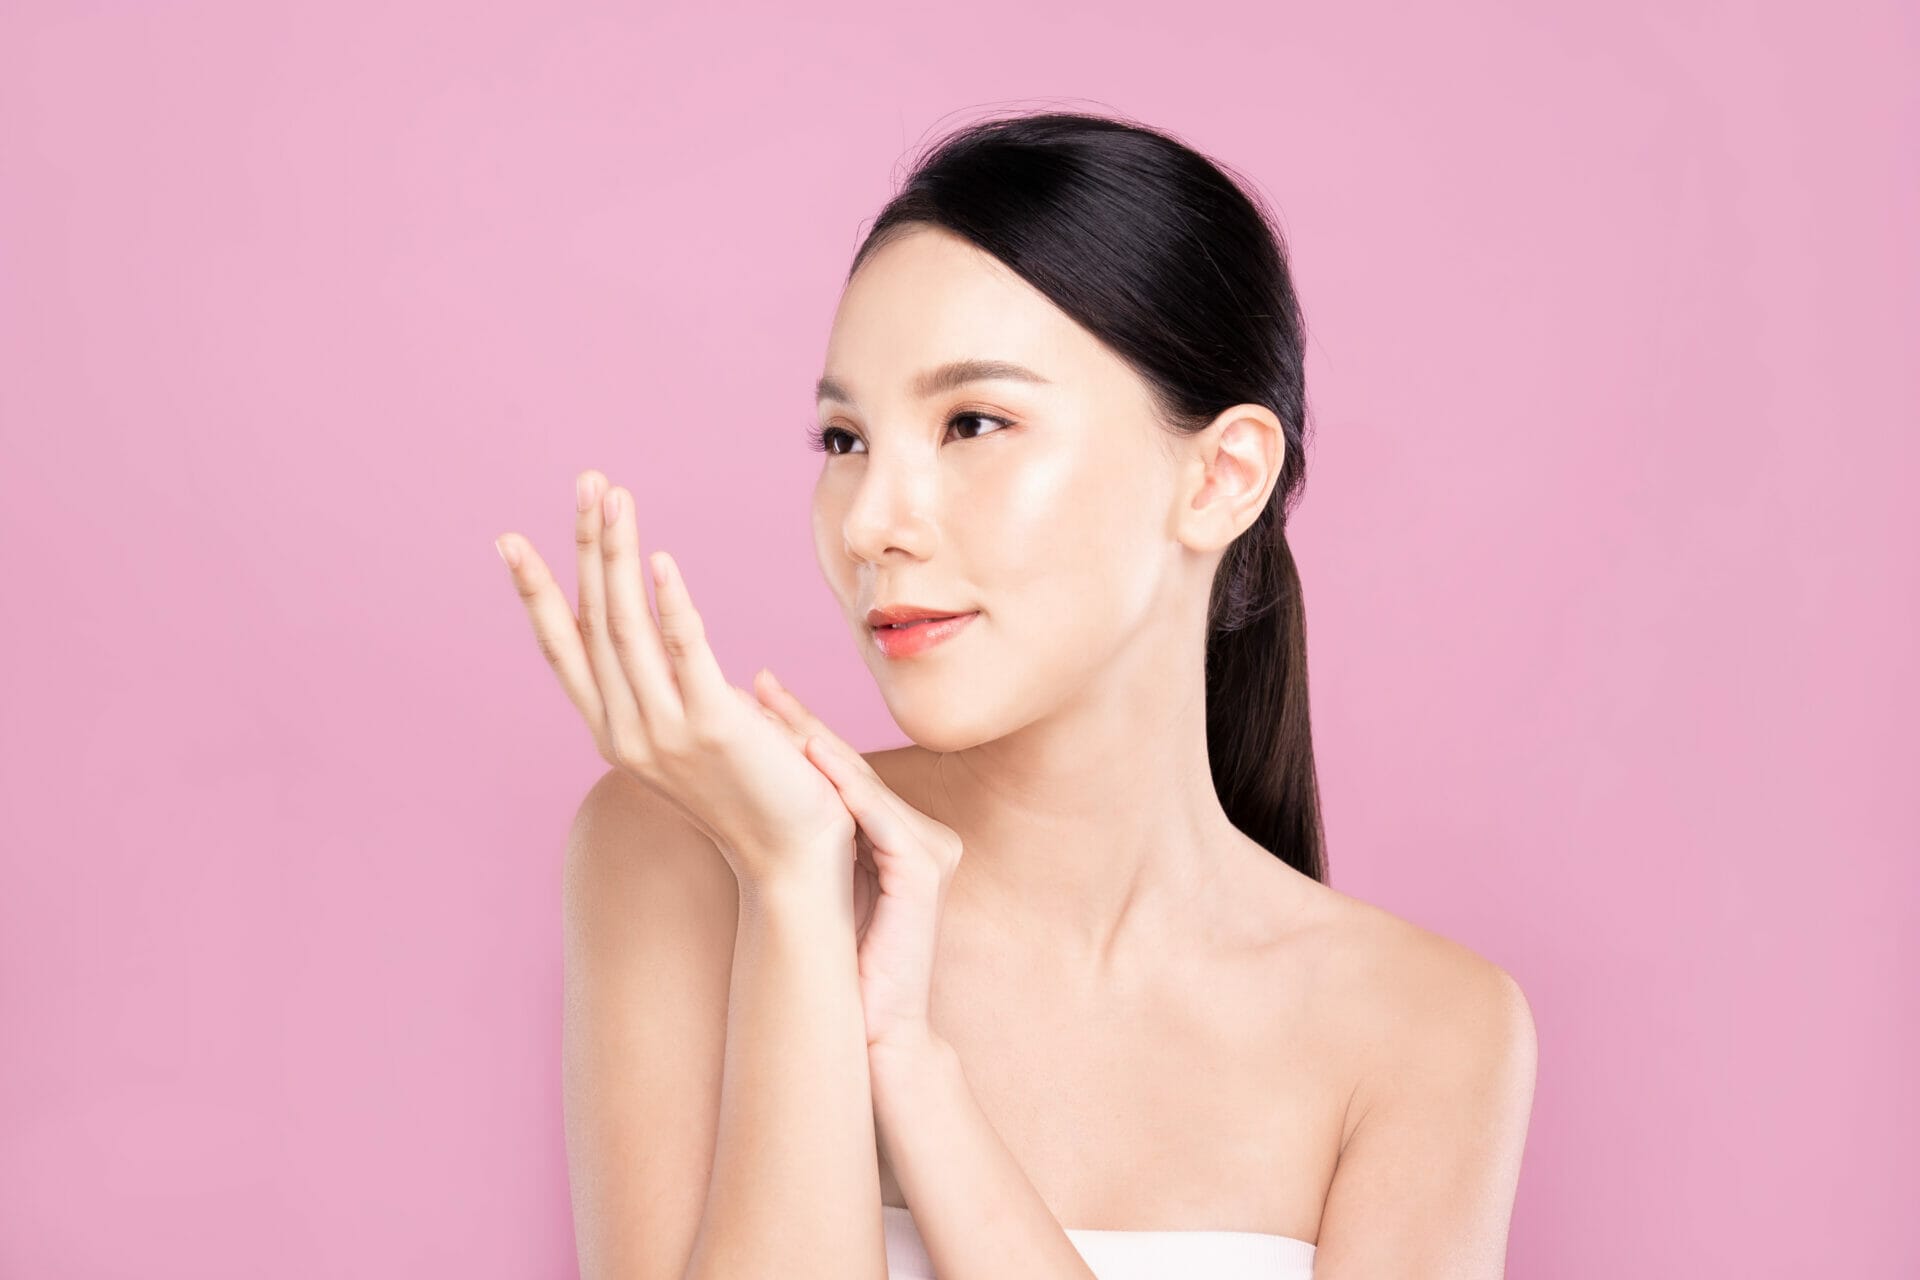 Beautiful Young Asian woman with clean fresh white skin touching hands softly in beauty pose. Girl smiling in isolated background. Facial treatment, cosmetic, make up and surgery advertisement